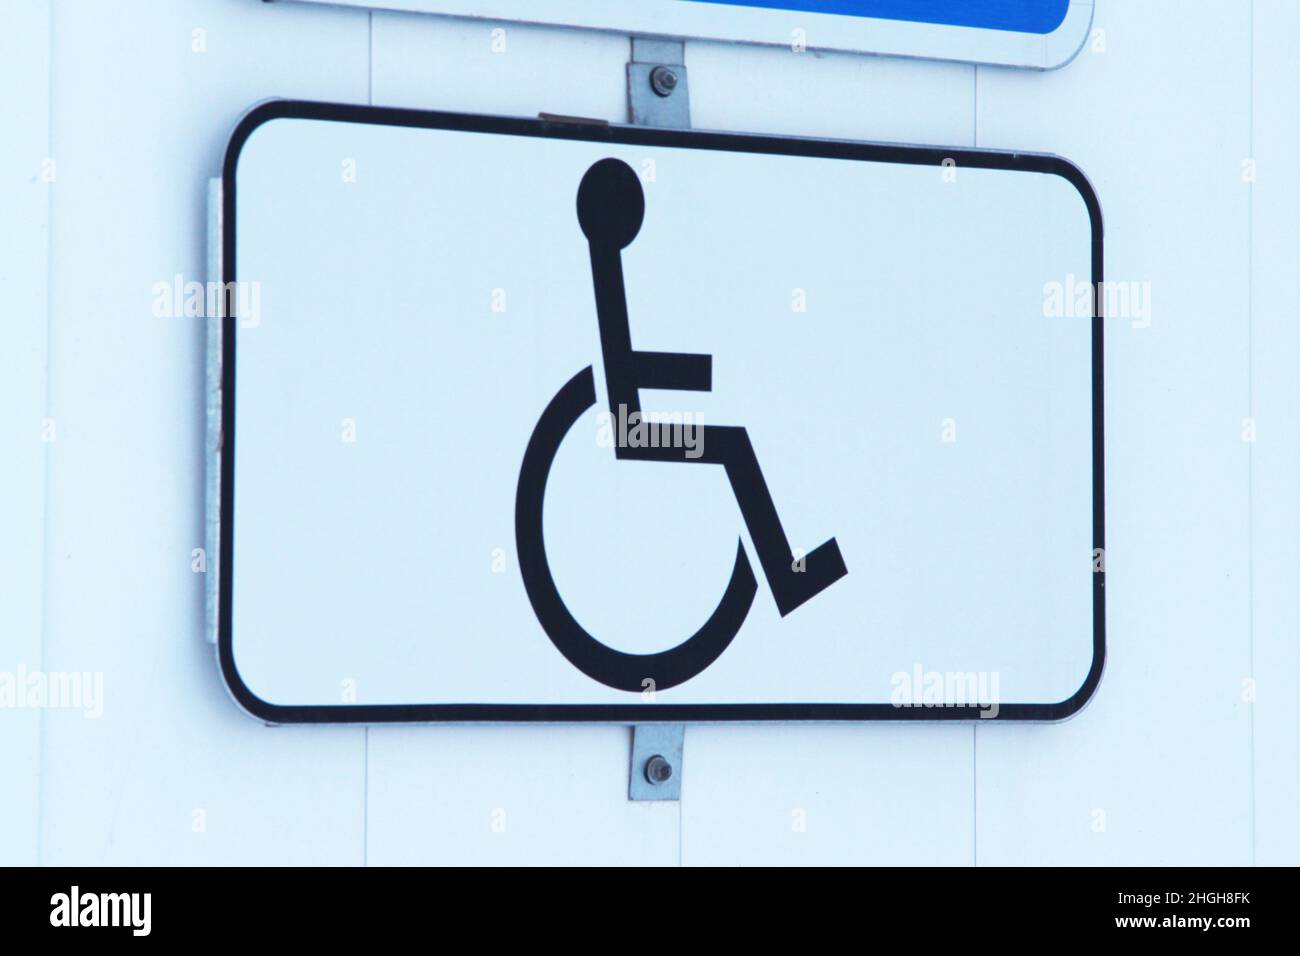 Disabled parking permit sign on white background. Parking sign for people with disabilities Stock Photo